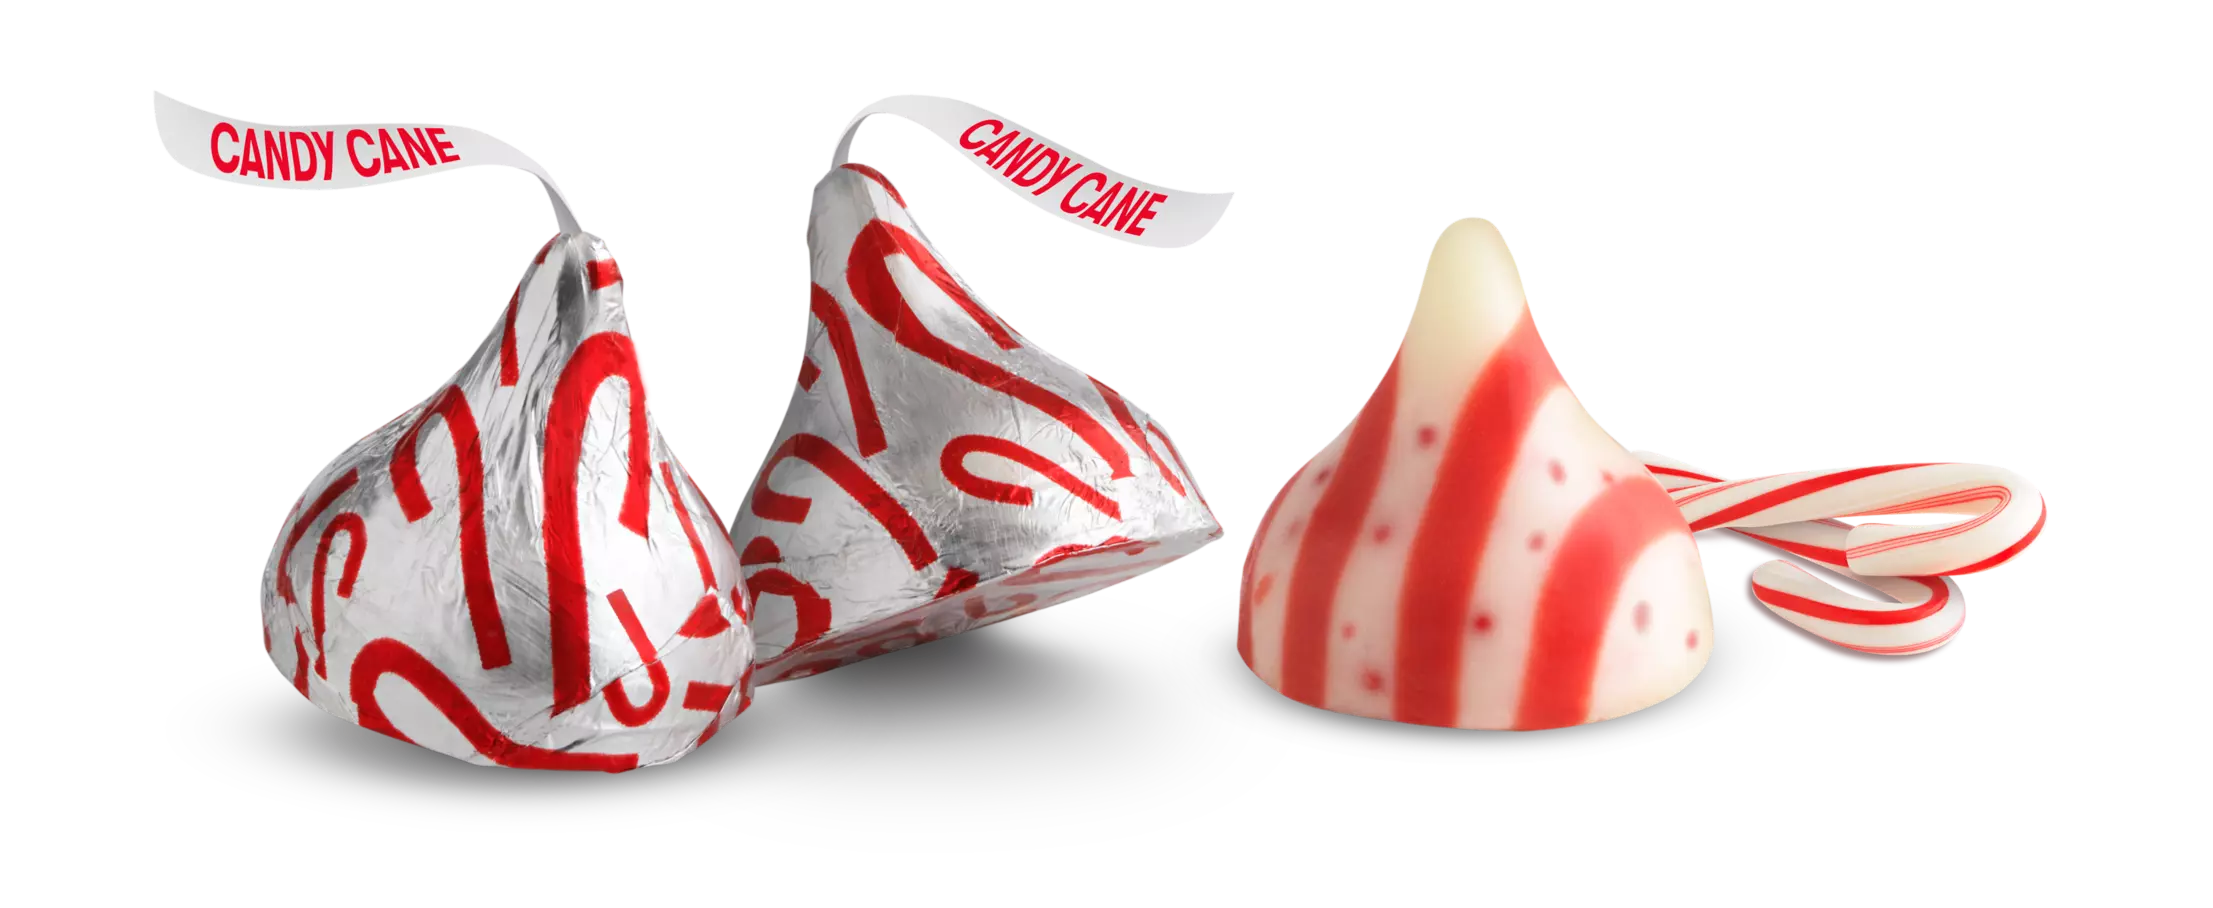 HERSHEY'S KISSES Candy Cane Mint Candy, 30.1 oz bag - Out of Package